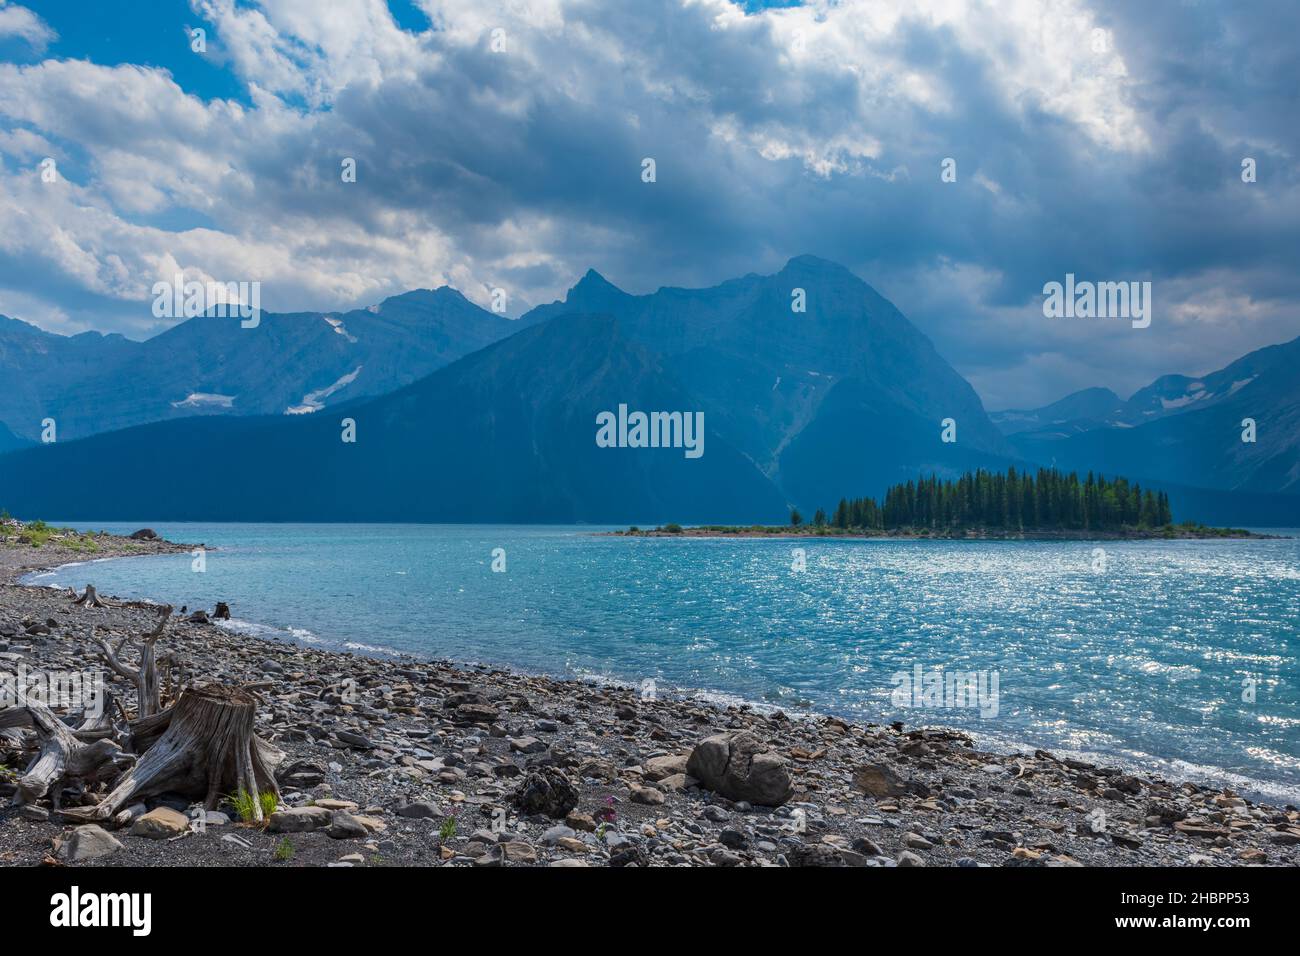 Scenic Upper Kananaskis Lake on a stormy summer day in the mountains, Alberta Canada. Stock Photo